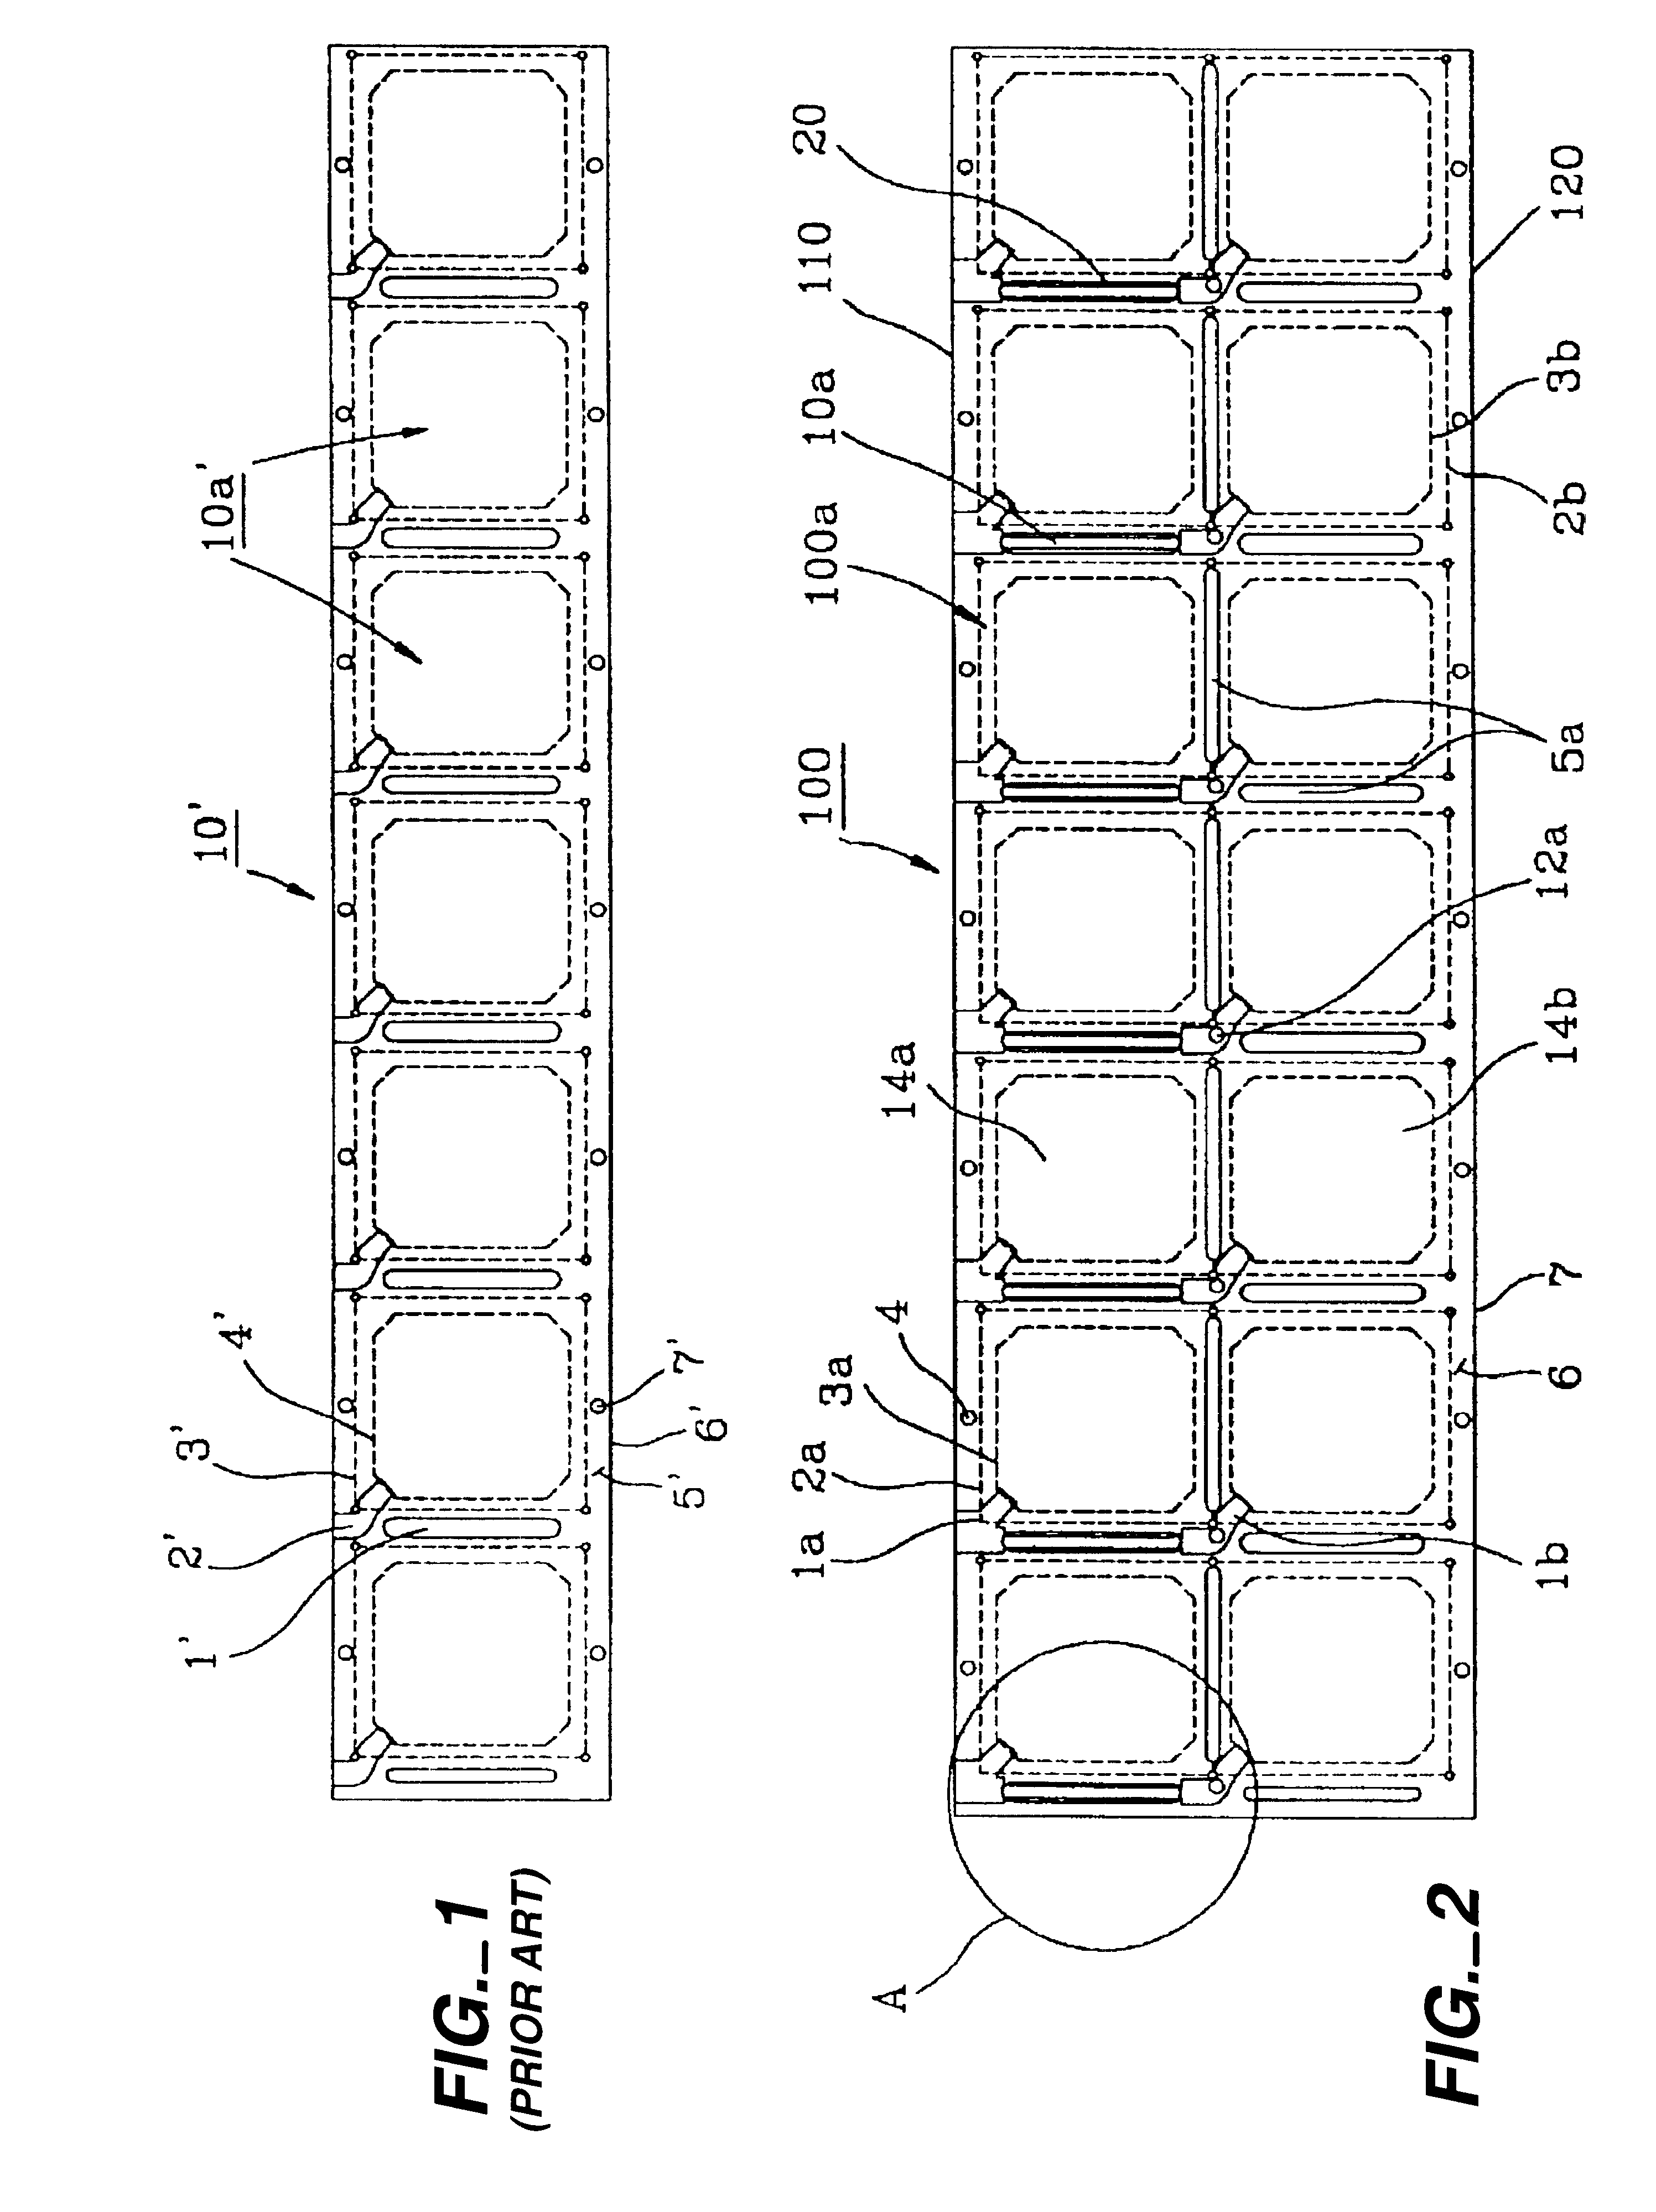 Matrix type printed circuit board for semiconductor packages